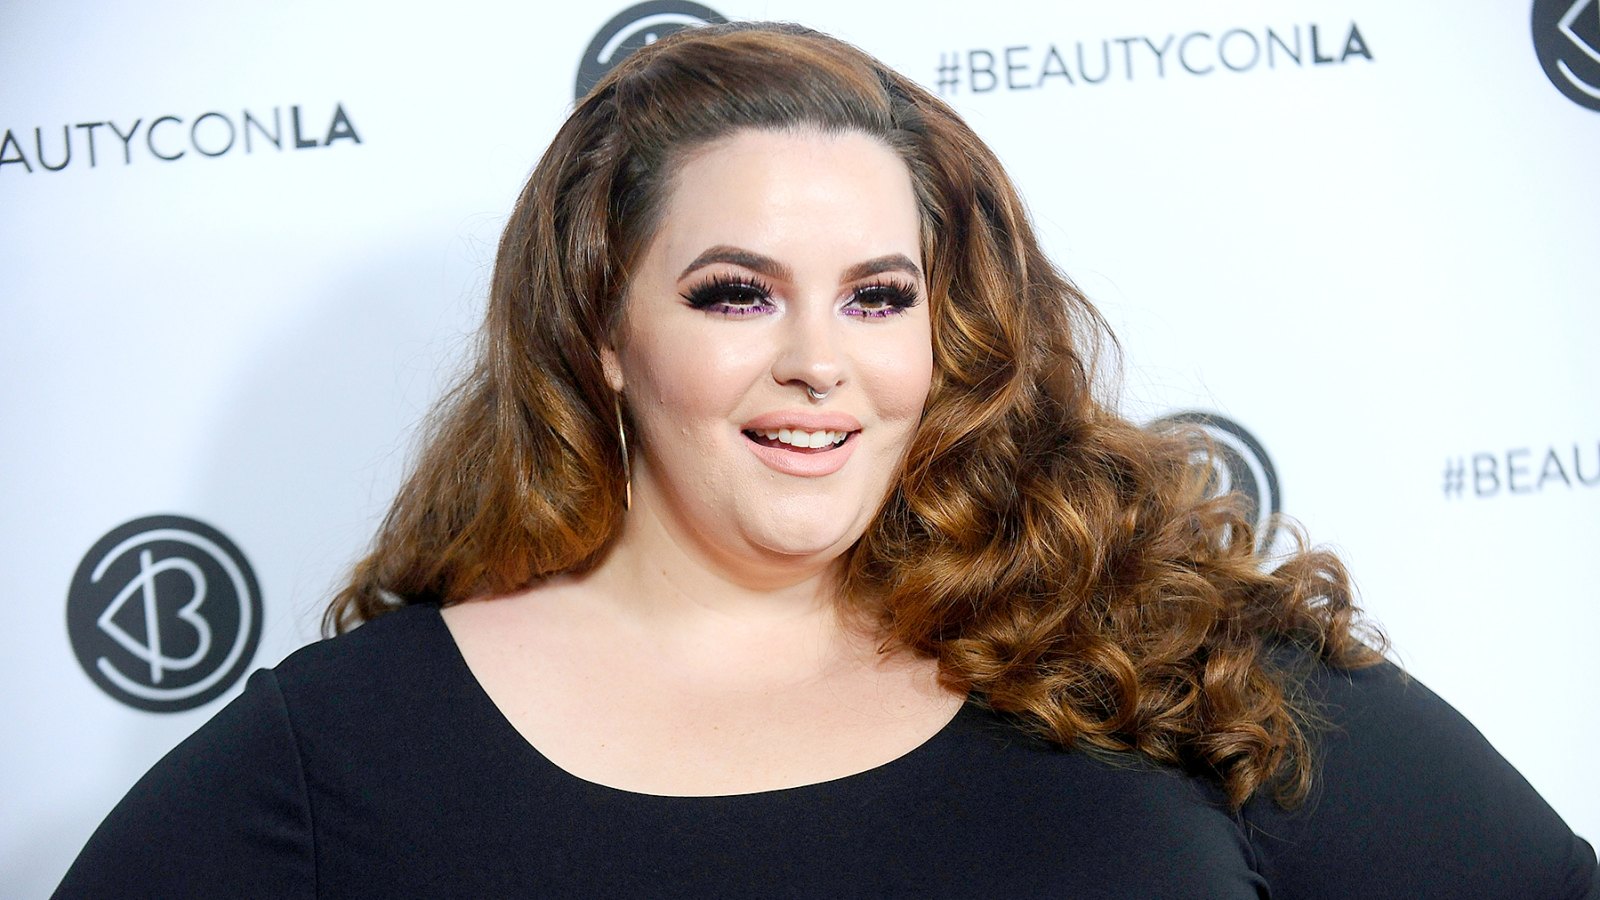 Tess Holliday attends the 5th annual Beautycon festival at Los Angeles Convention Center on August 13, 2017 in Los Angeles, California.